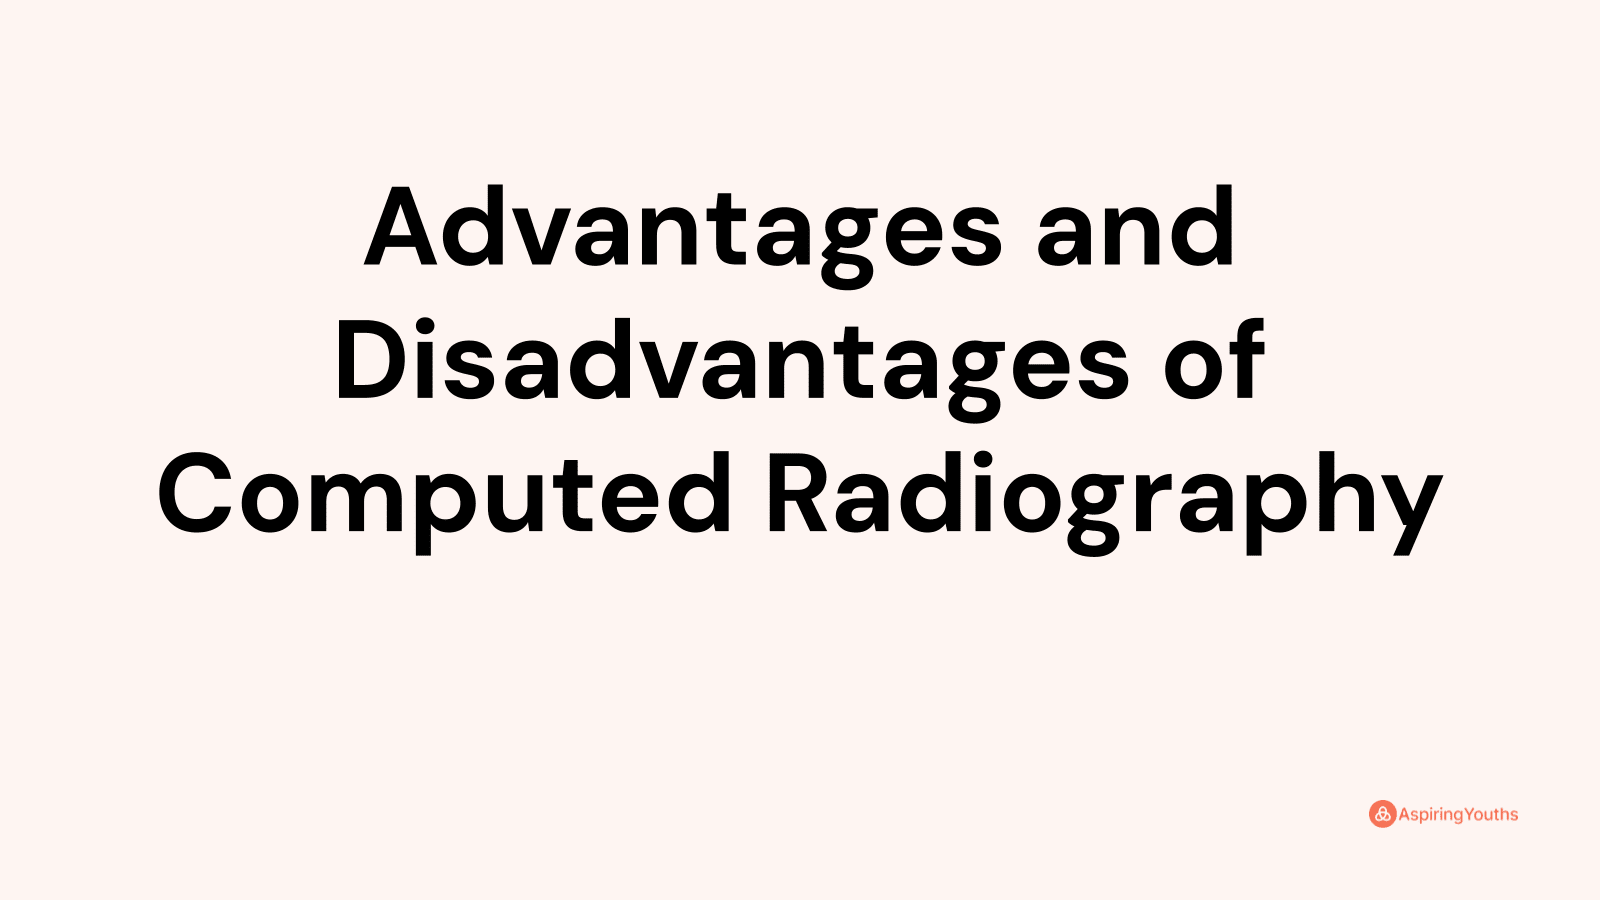 Advantages and disadvantages of Computed Radiography